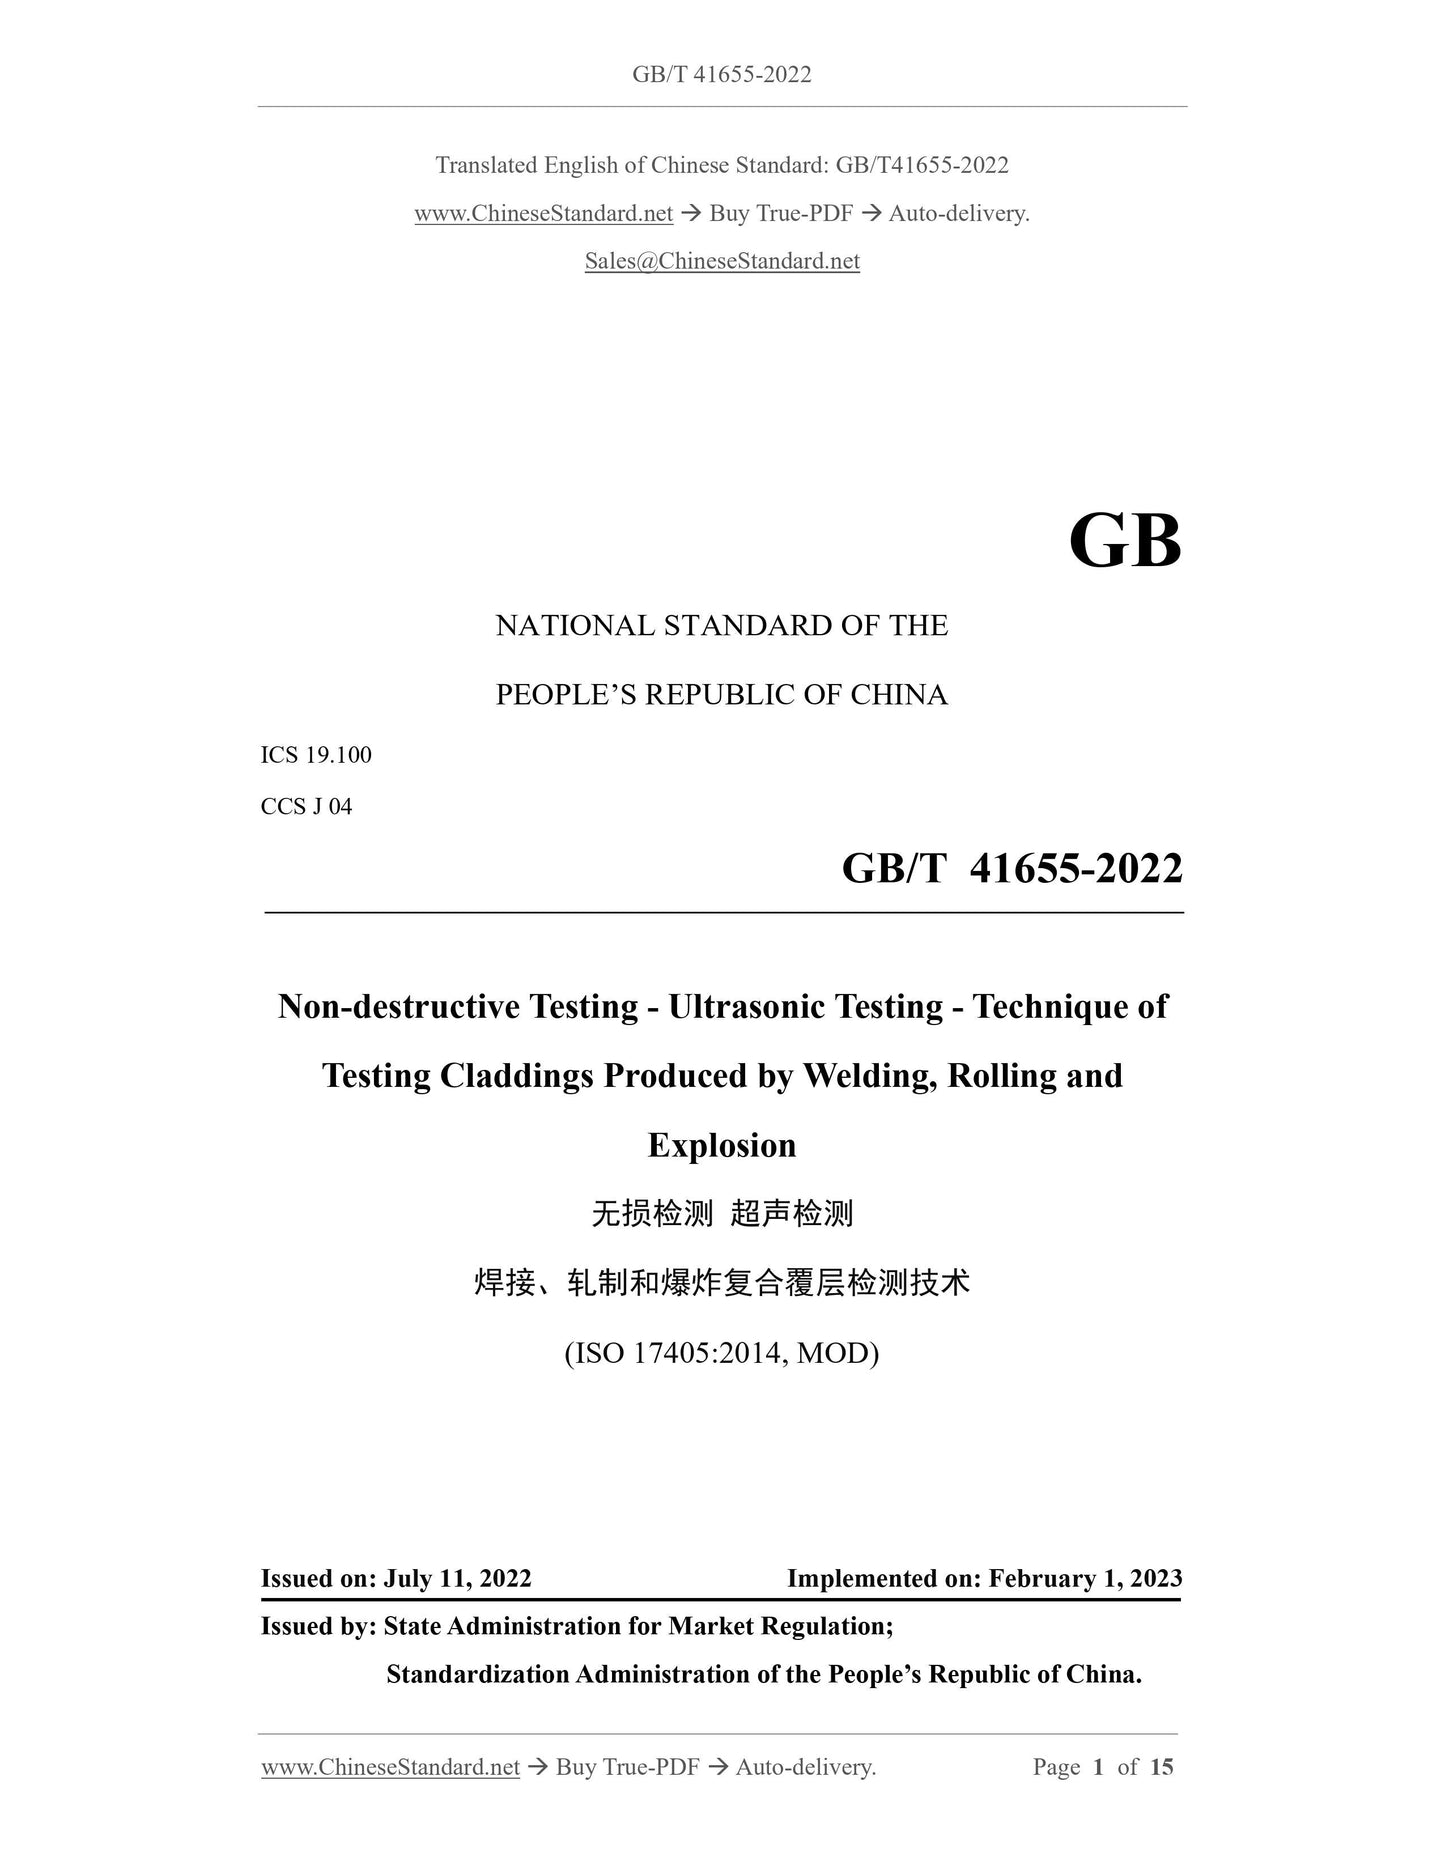 GB/T 41655-2022 Page 1